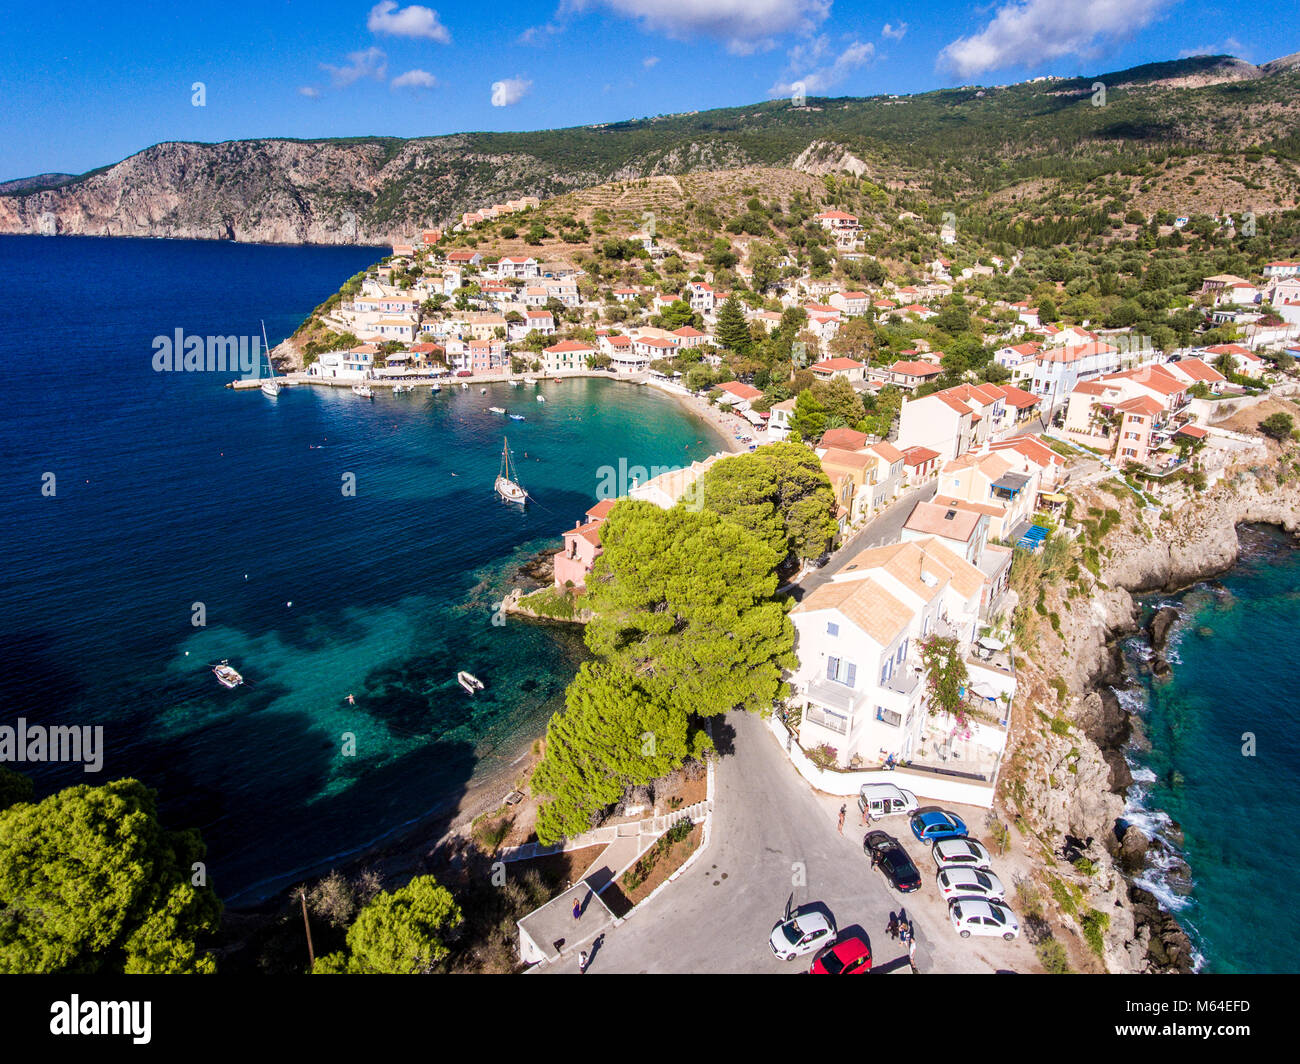 Aerial view over Assos Kefalonia beach with clear blue waters and yachts in harbour Stock Photo